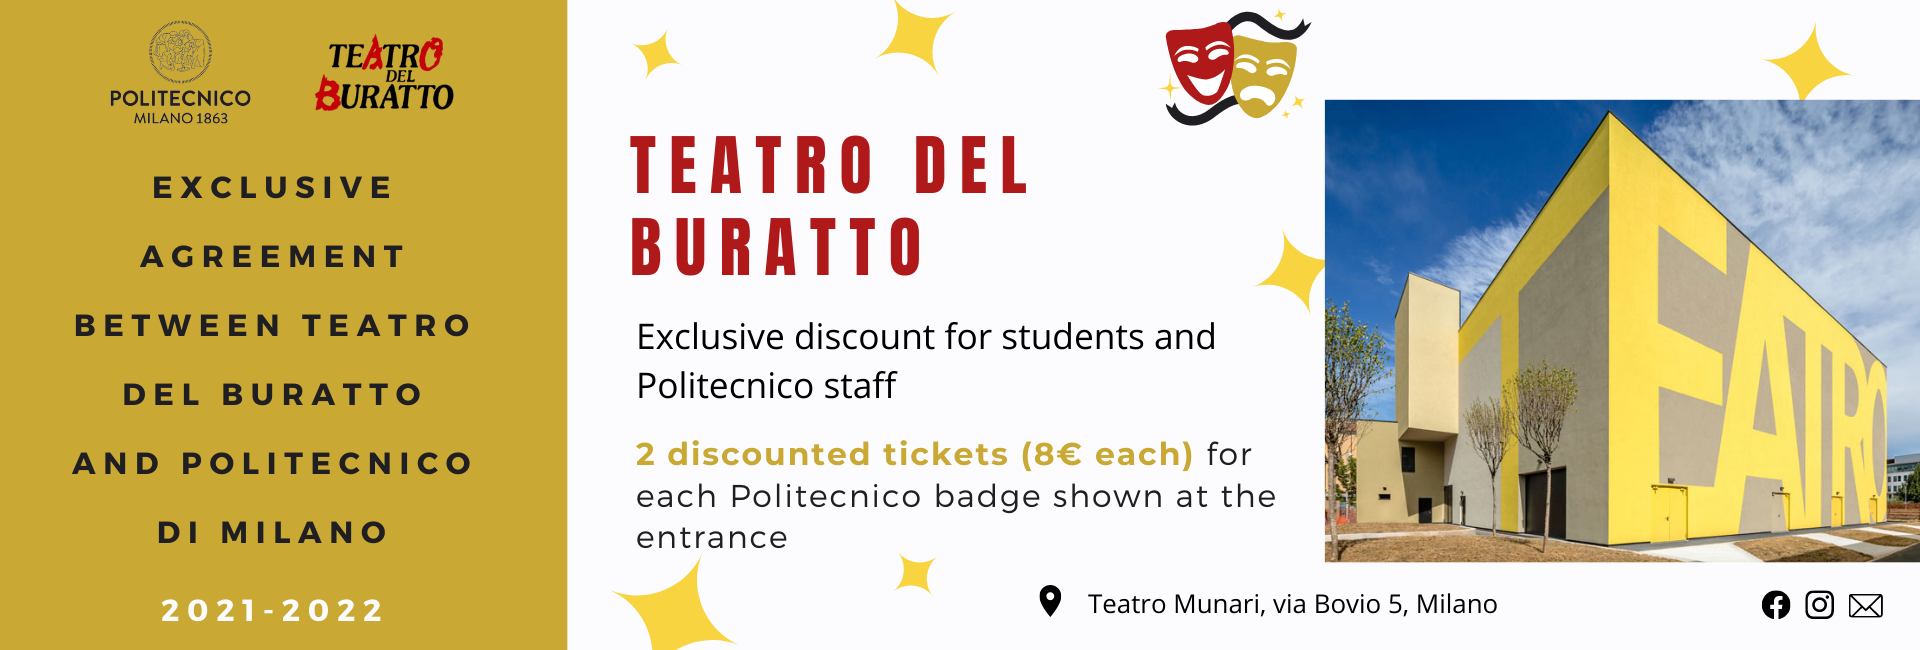 Teatro del Buratto: 2 discounted tickets (8€ each) for each Politecnico badge shown at the entrance